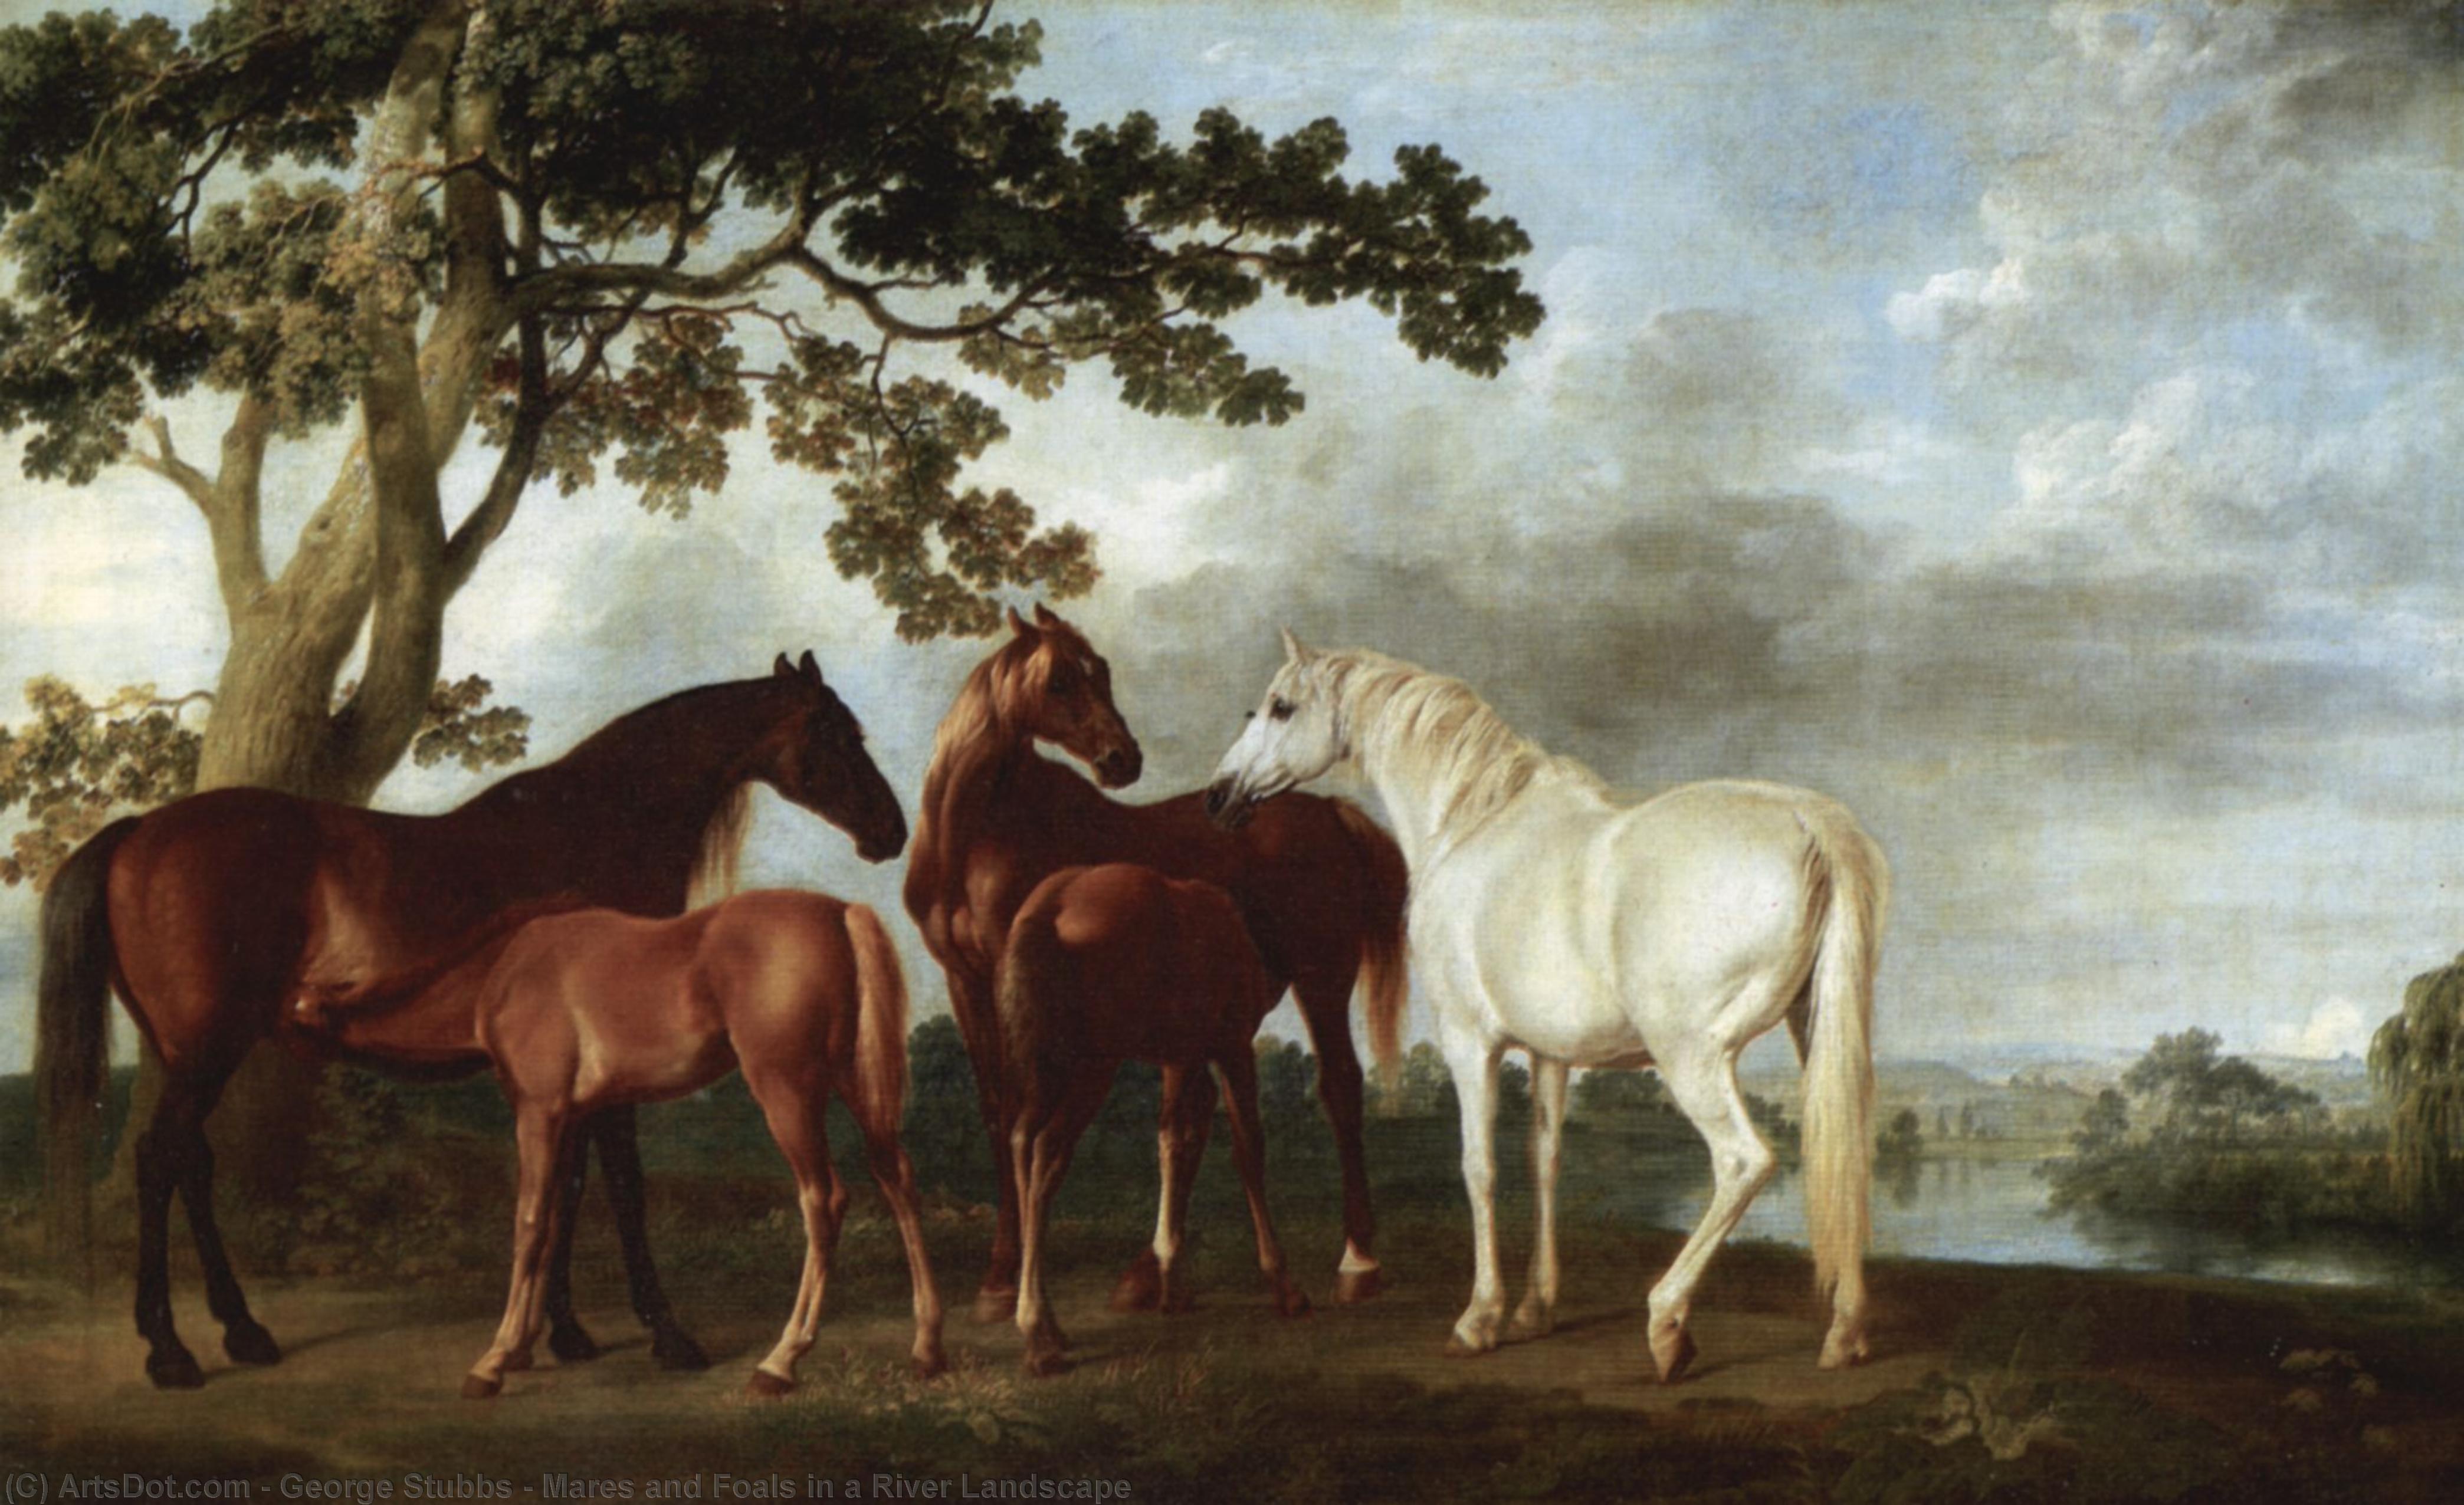 WikiOO.org - Encyclopedia of Fine Arts - Malba, Artwork George Stubbs - Mares and Foals in a River Landscape